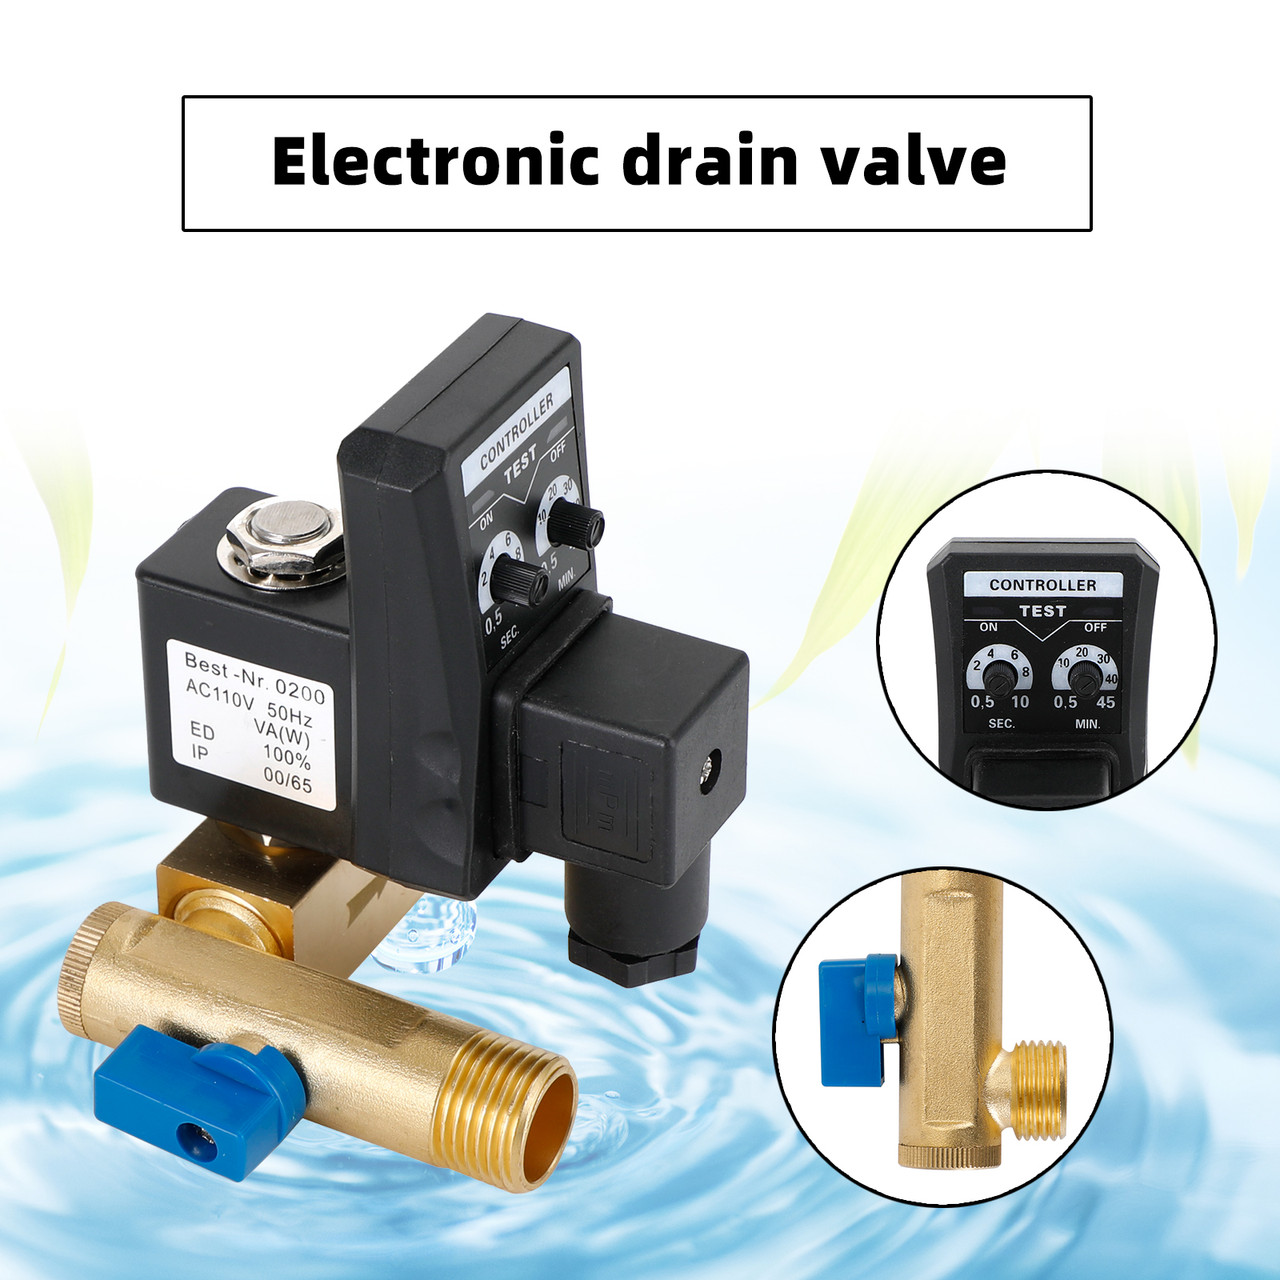 AC 110V 1/2" Automatic Electronic Timed Air Compressor Auto Drain Valve